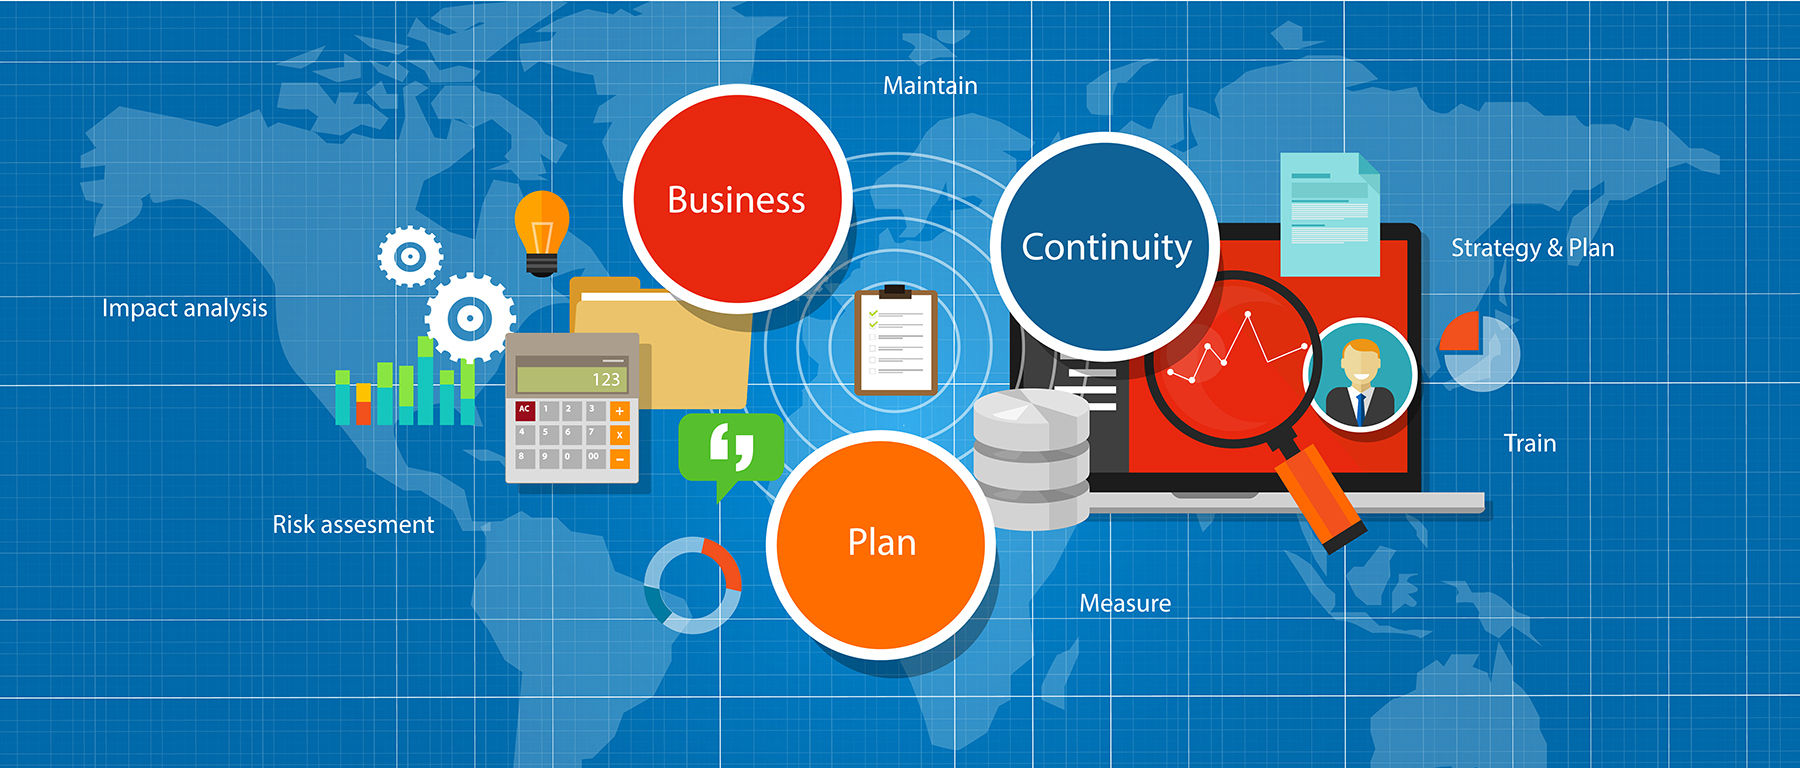 advantages of having a business continuity plan in an organization